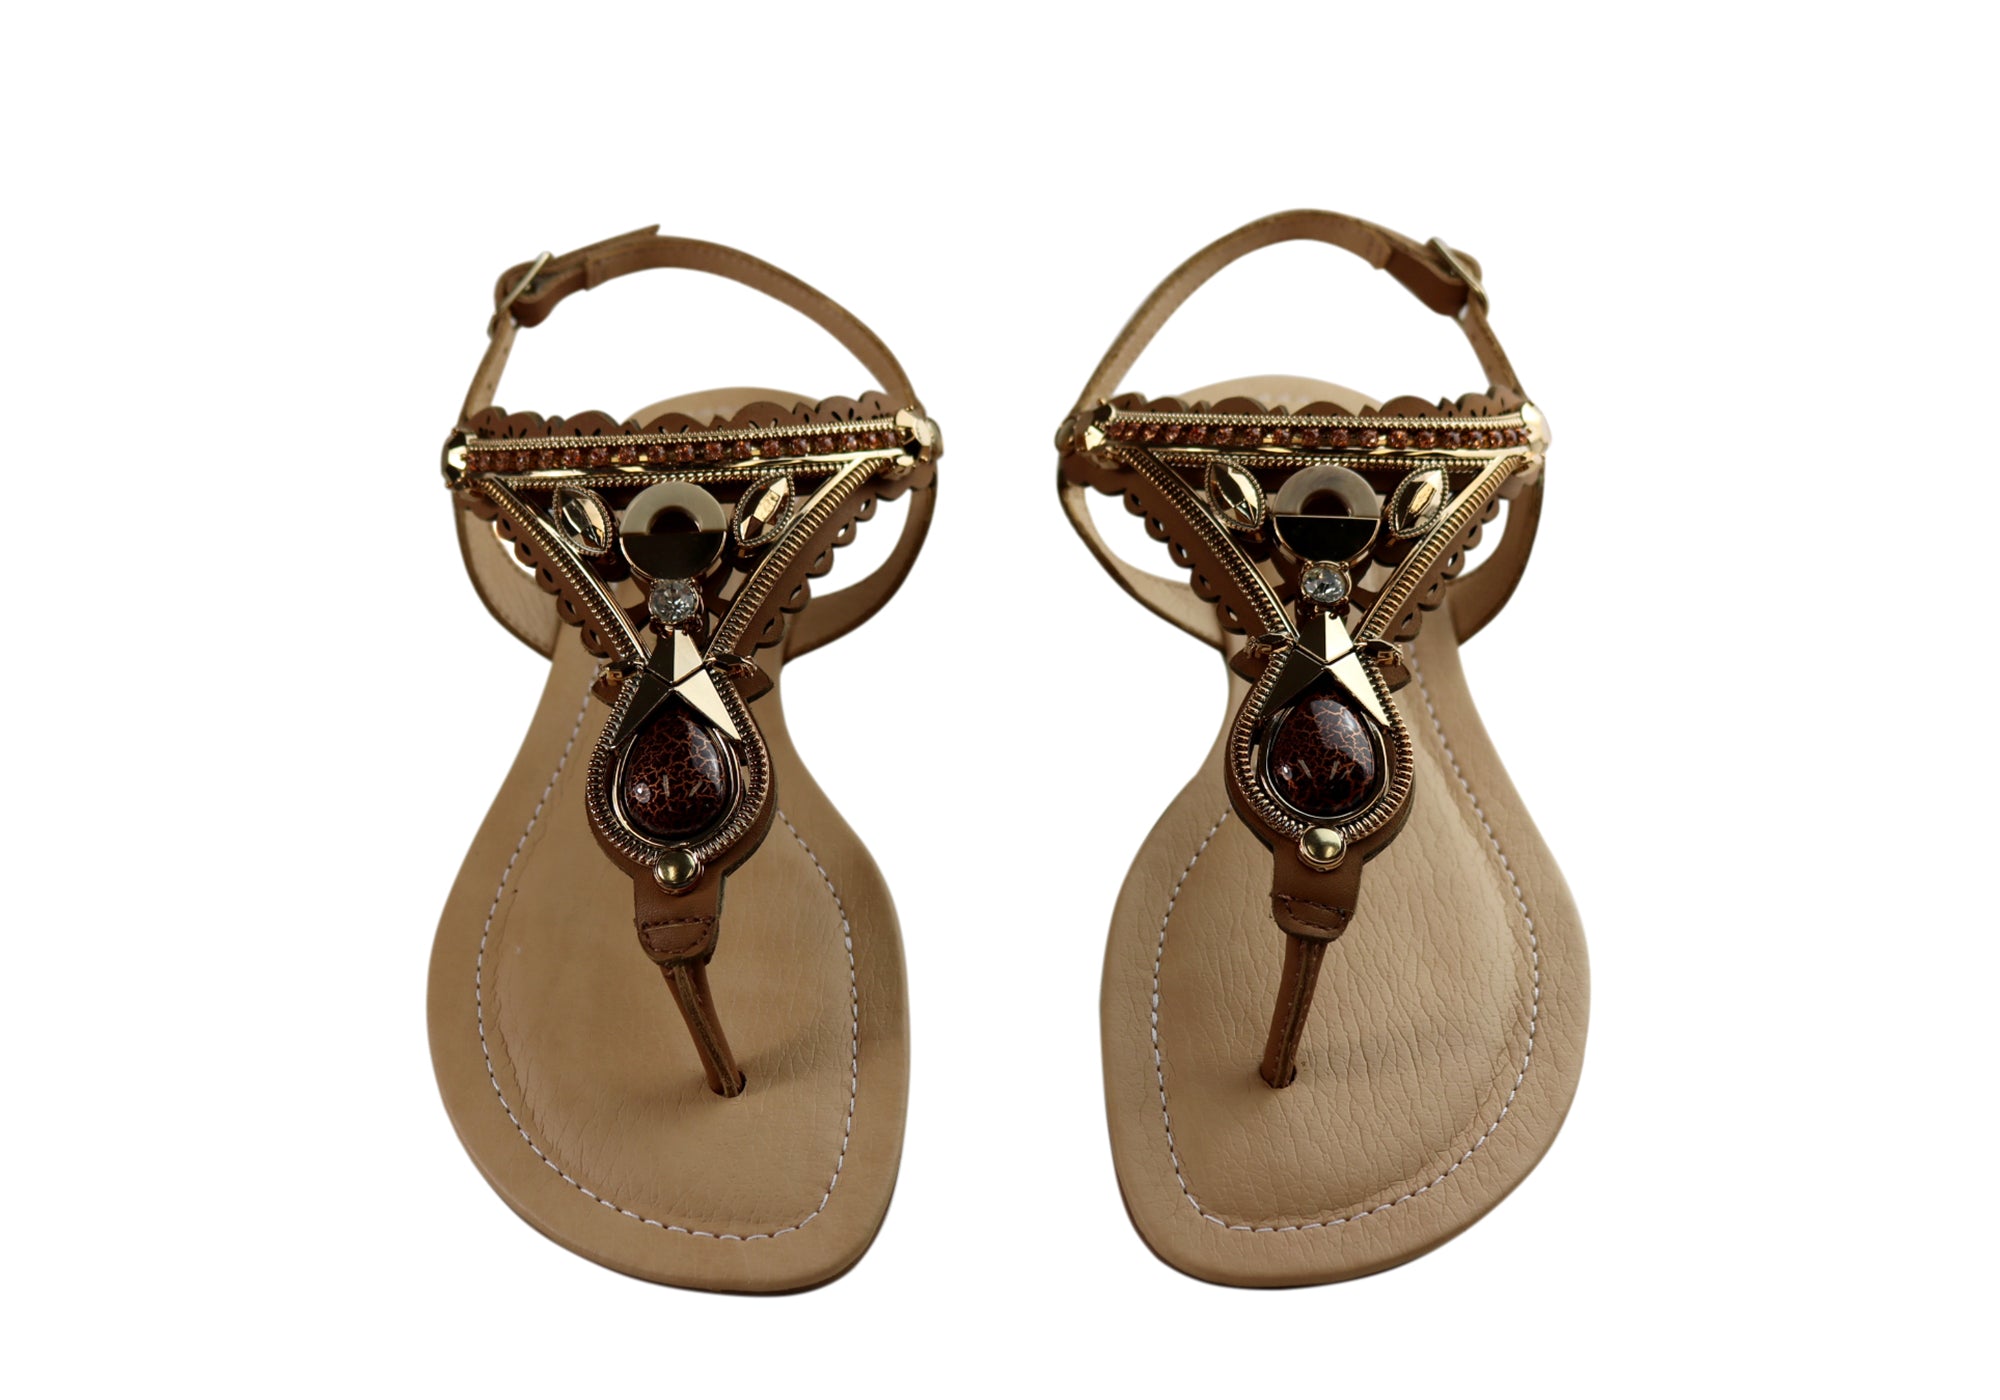 Bottero Caymen Womens Comfortable Leather Sandals Made In Brazil